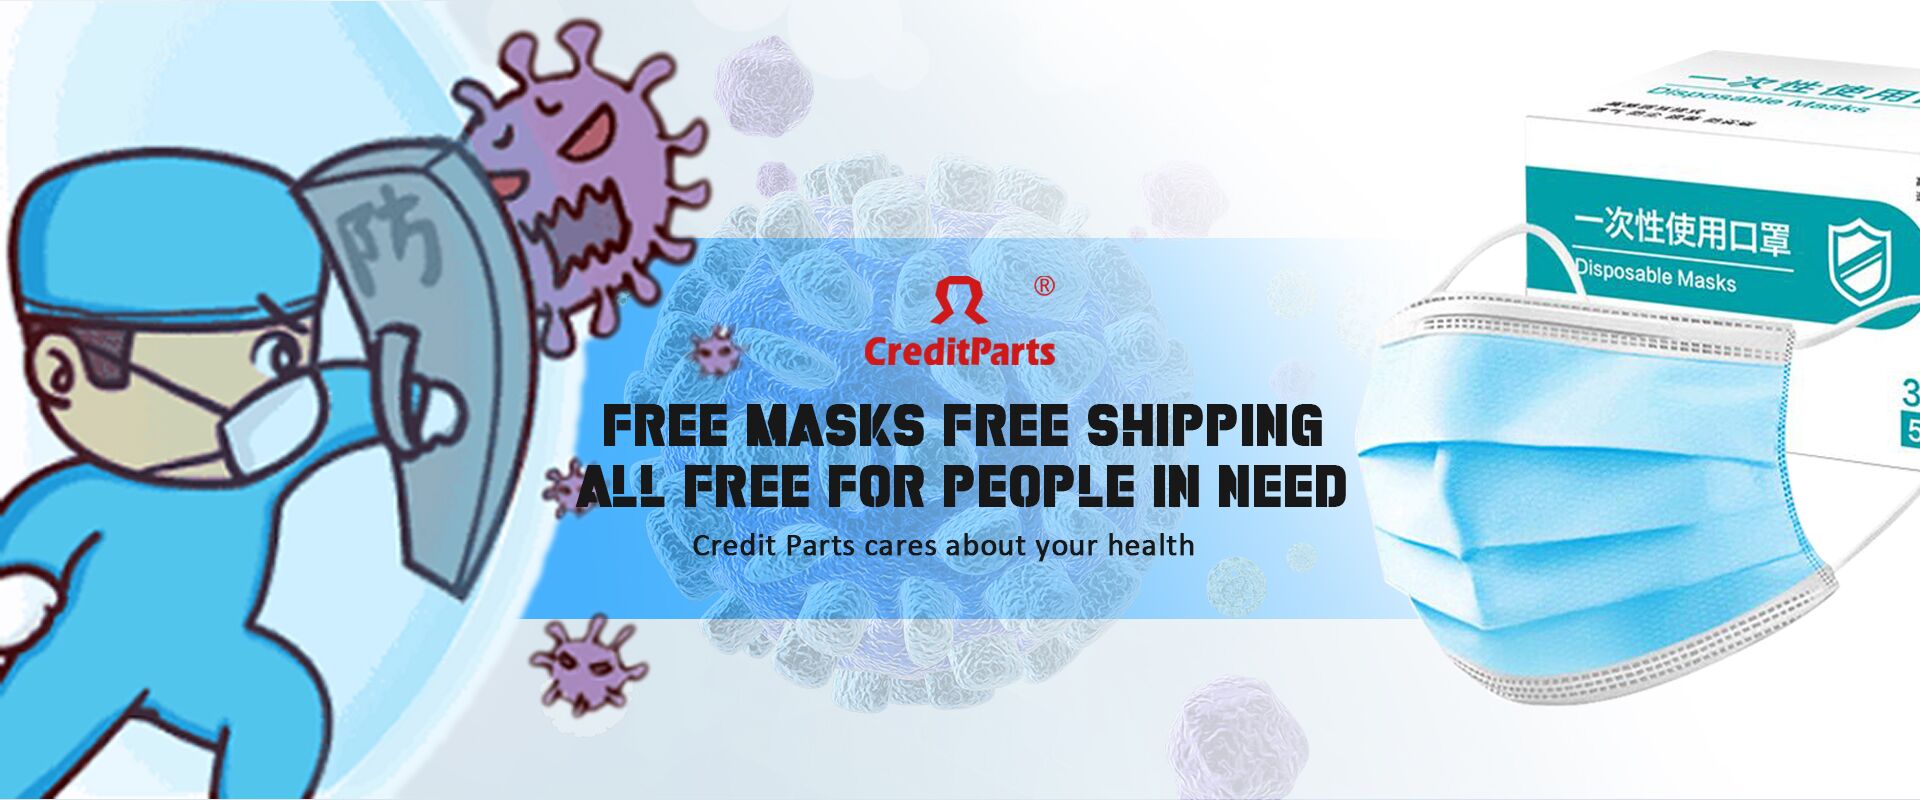 Free Masks For People In Need ,Credit Parts Cares About Your health .